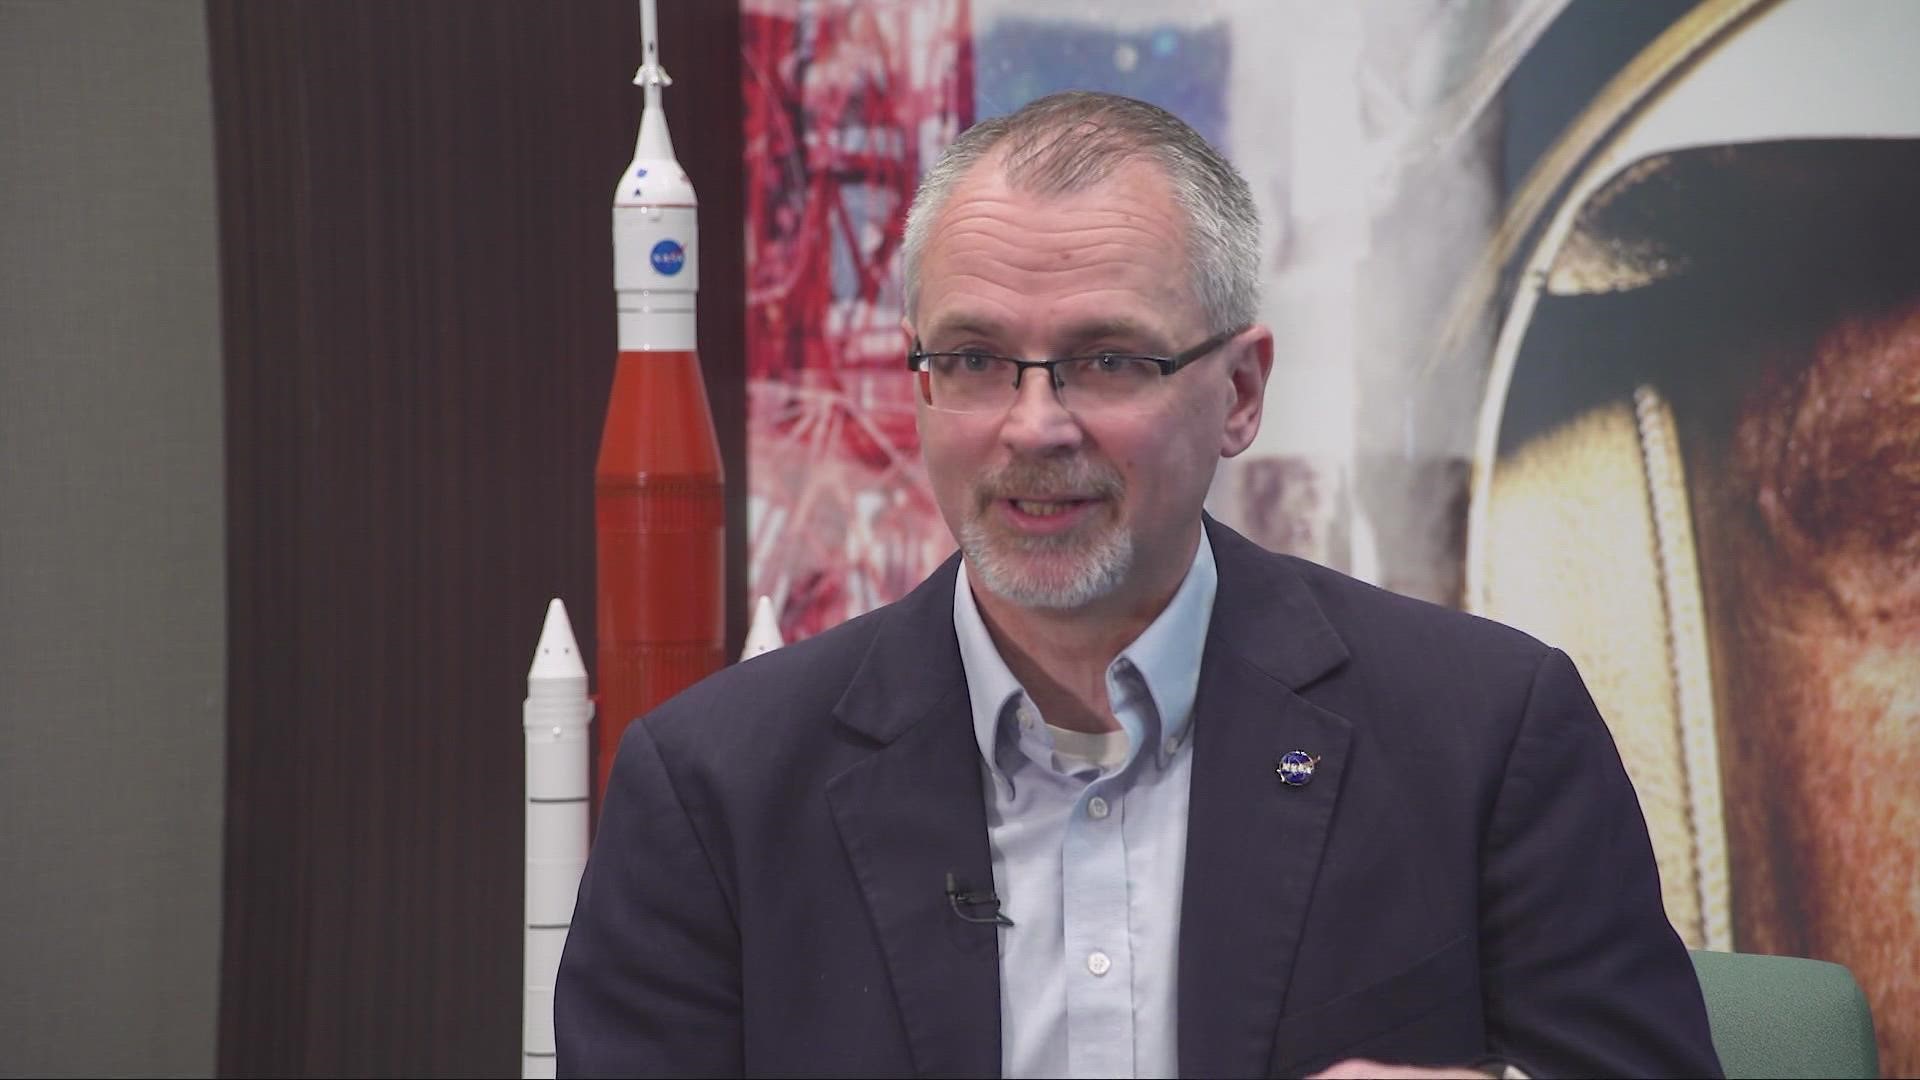 Cleveland's NASA Glenn has played a critical role in the Artemis 1 mission, overseeing development of the service module that will power and propel Orion.